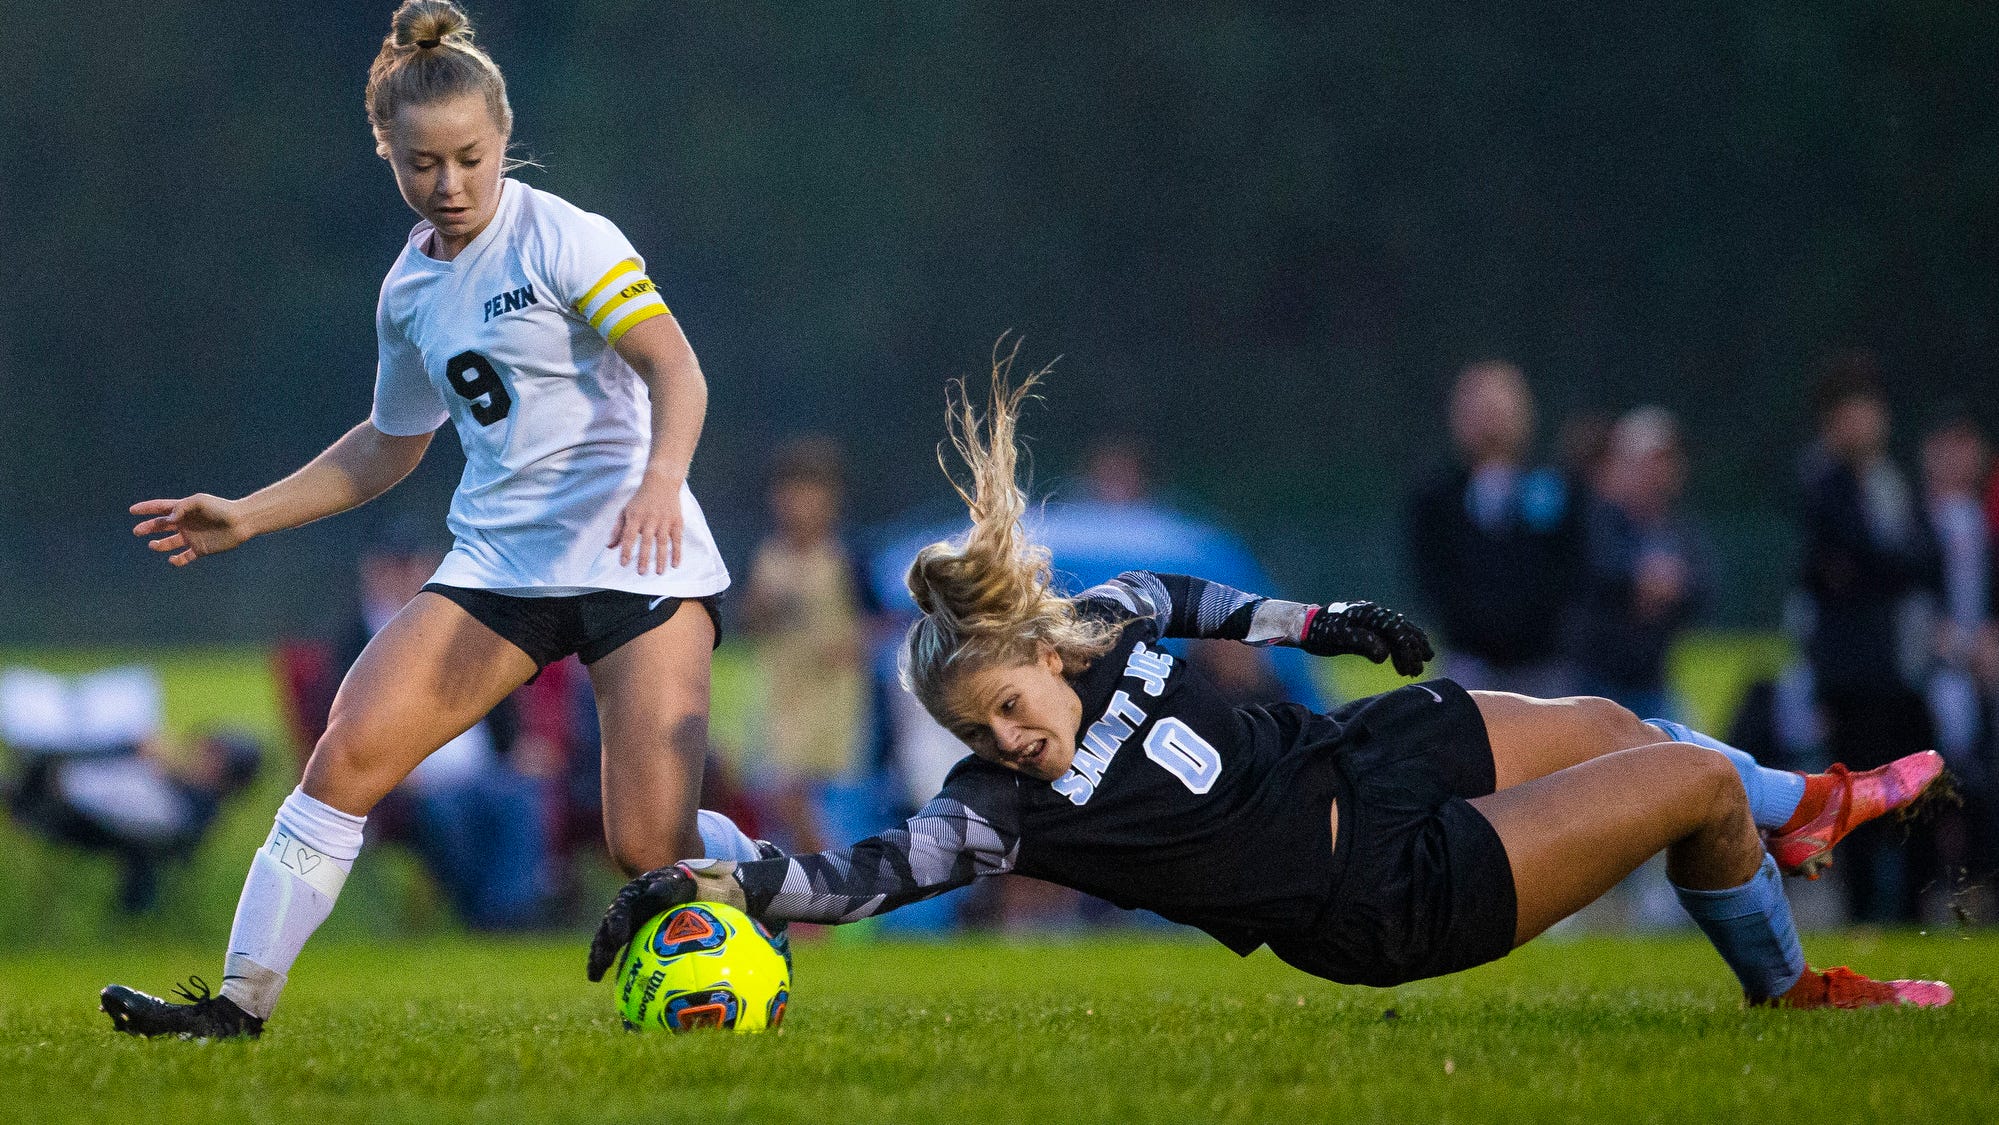 IHSAA girls soccer tournament Indiana sectional pairings announced